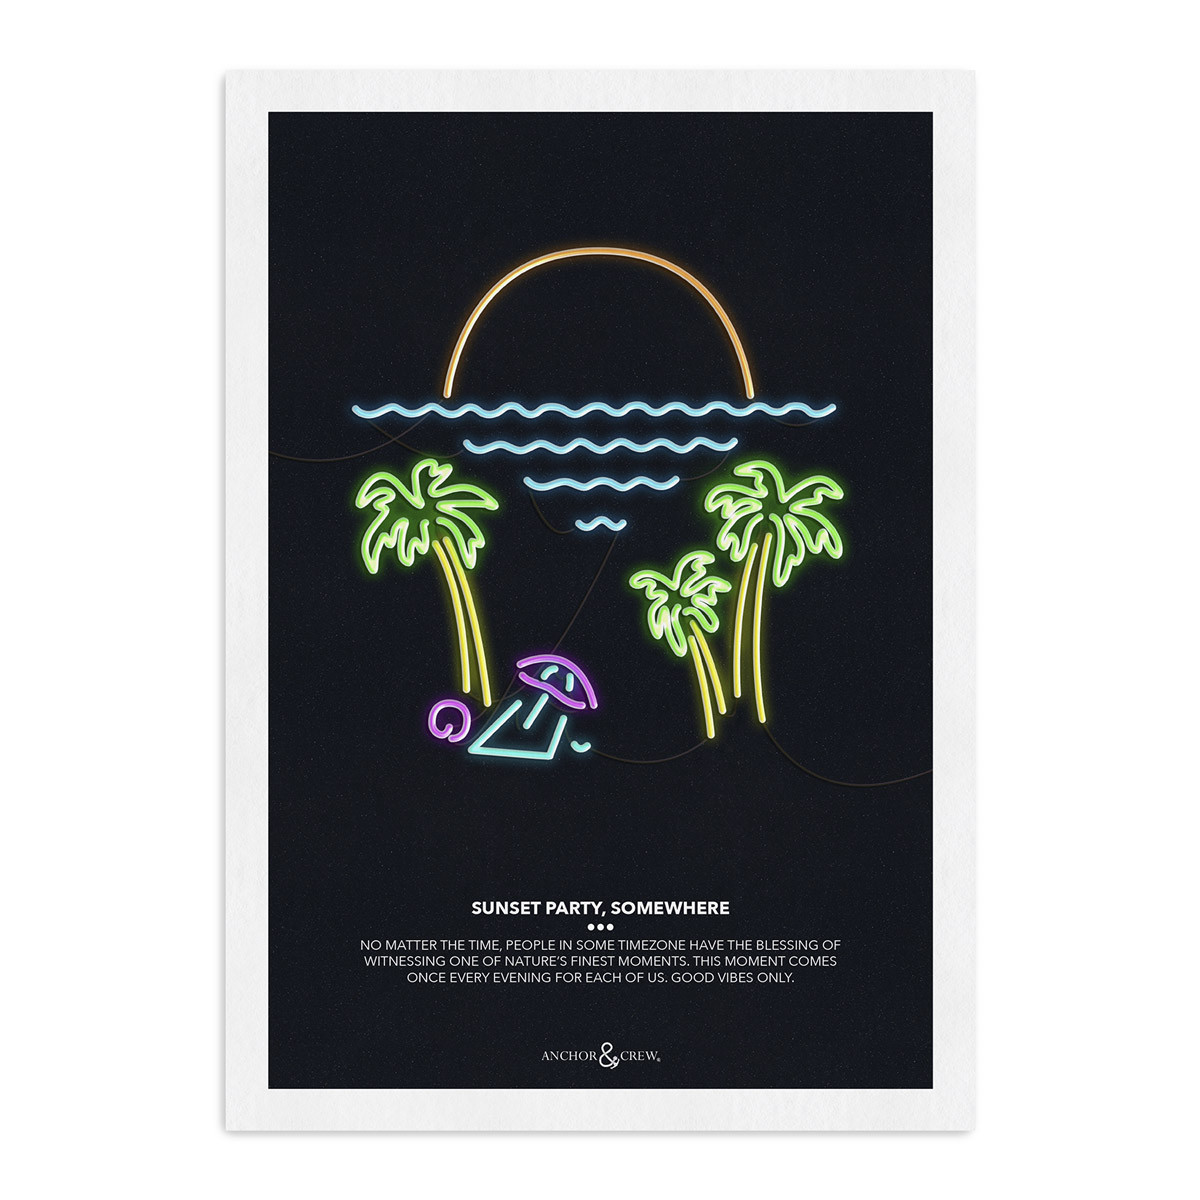 Anchor & Crew Sunset Party Archival Giclée Paper A3 Wall Print